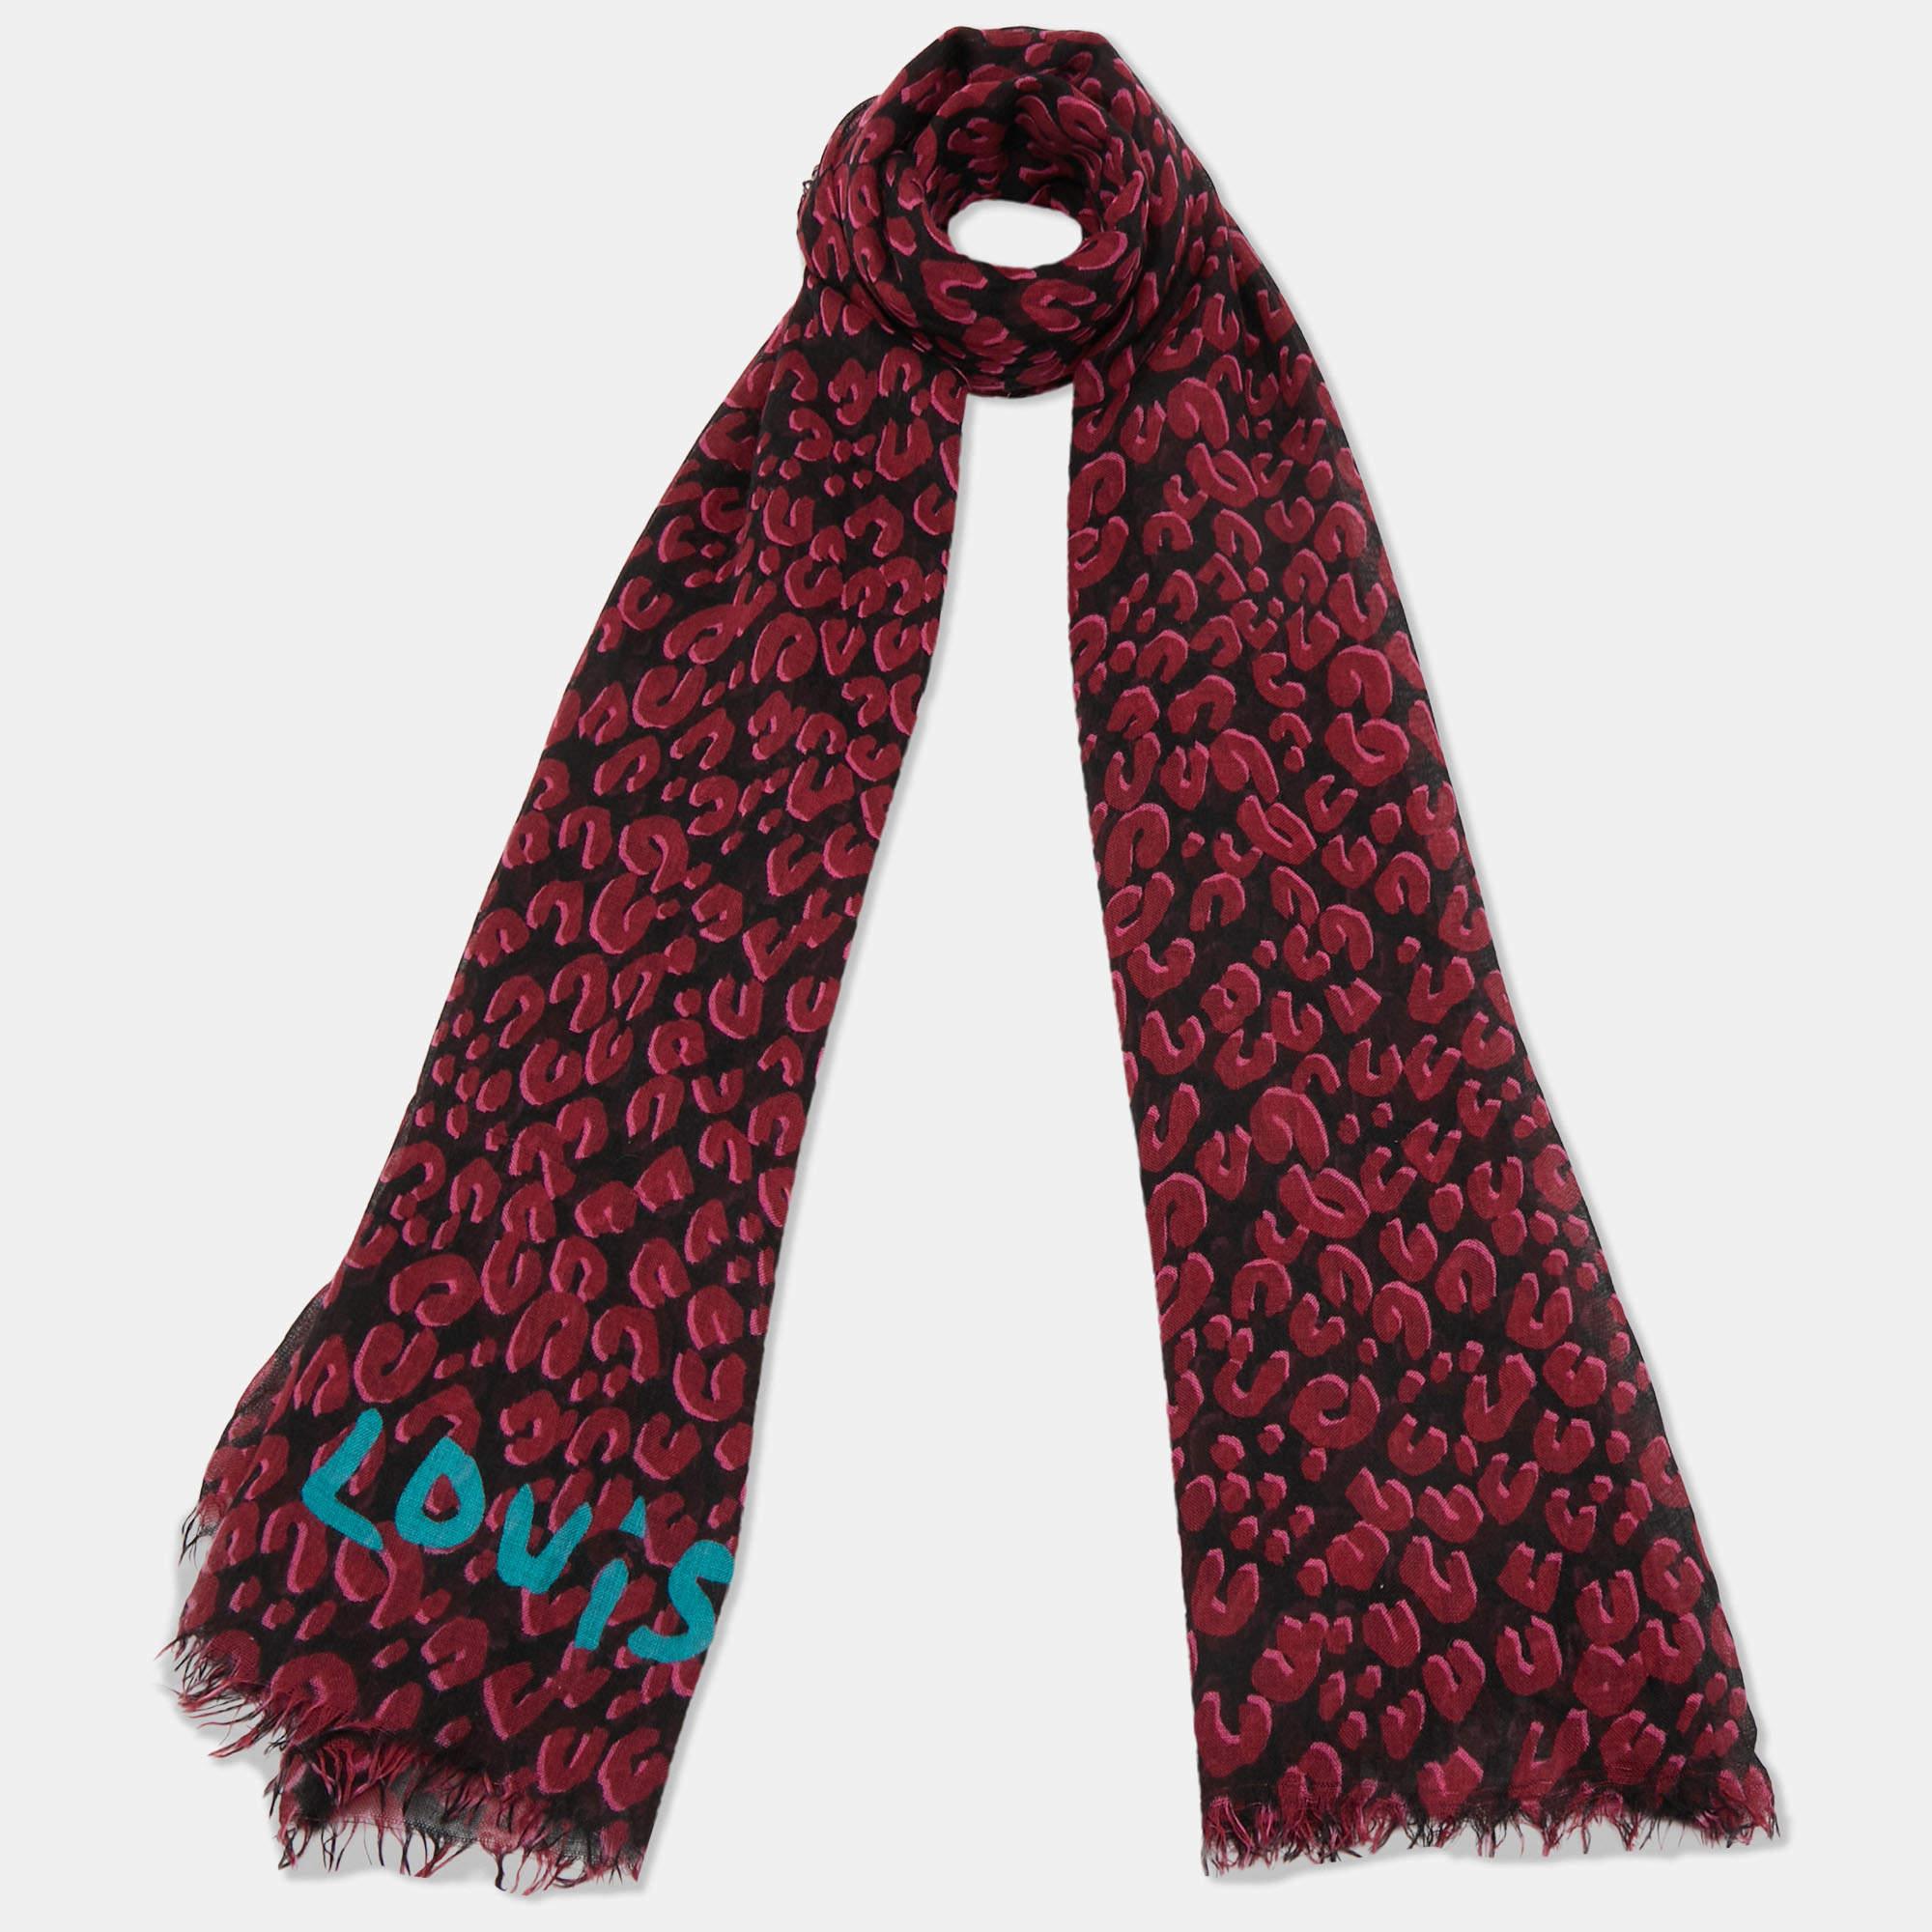 Whether it is over an evening outfit or chic casuals, Louis Vuitton ensures an extra element of style with this gorgeous scarf. Made of cashmere & silk, the creation's appeal is brought out with prints all over.

